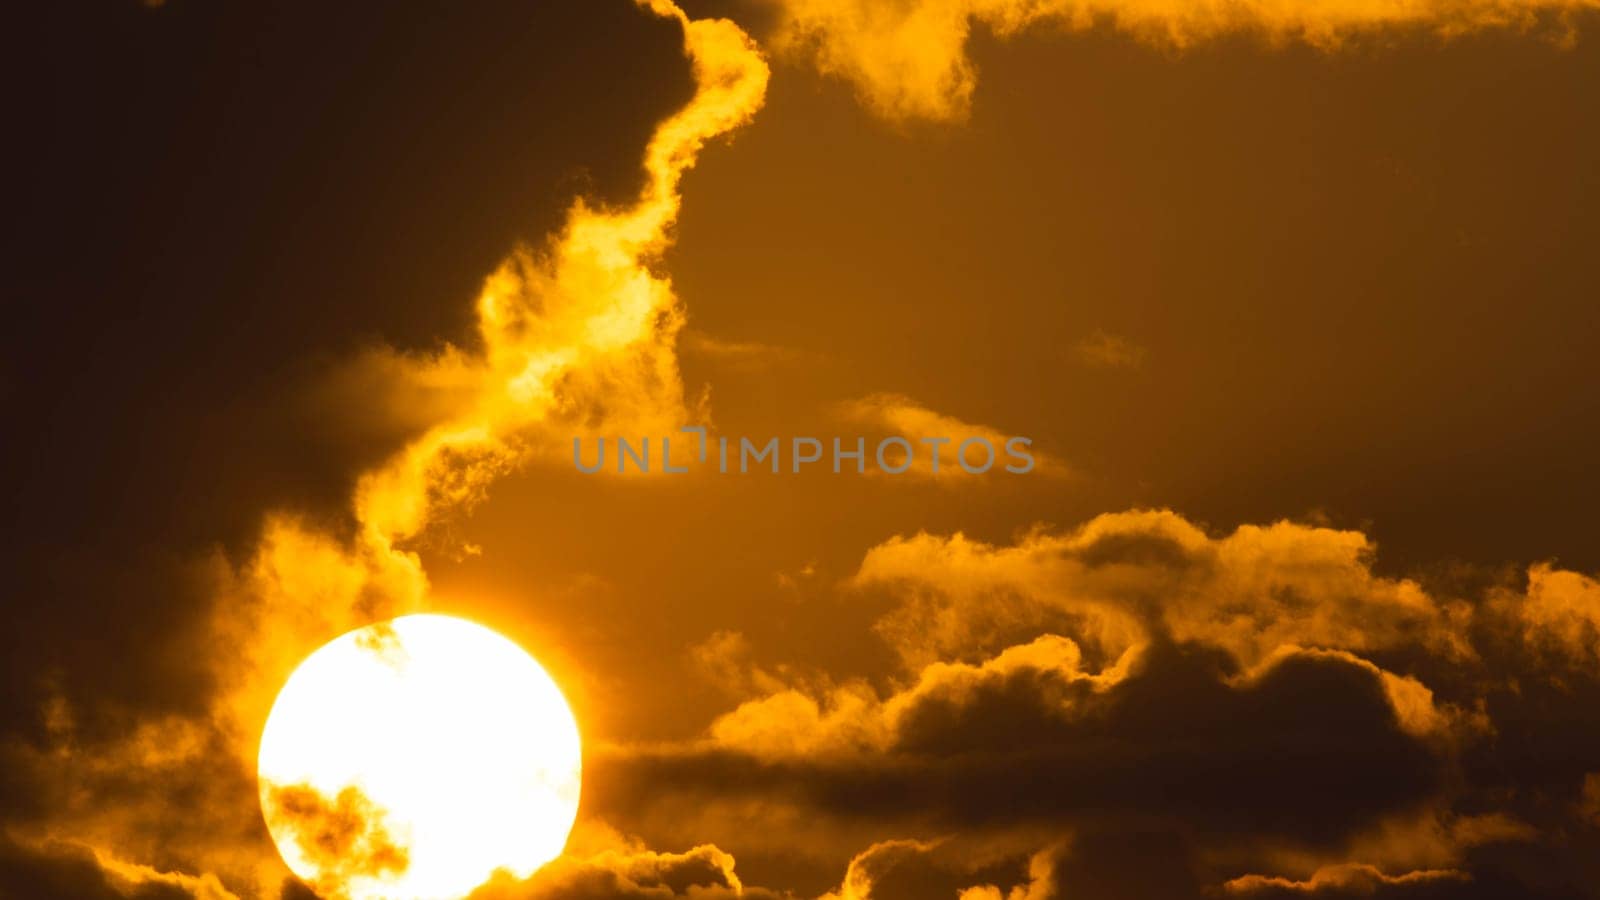 Beautiful nature morning with orange, yellow sunshine and fluffy clouds. Time lapse of a beautiful dramatic sky with a big sun at sunrise.